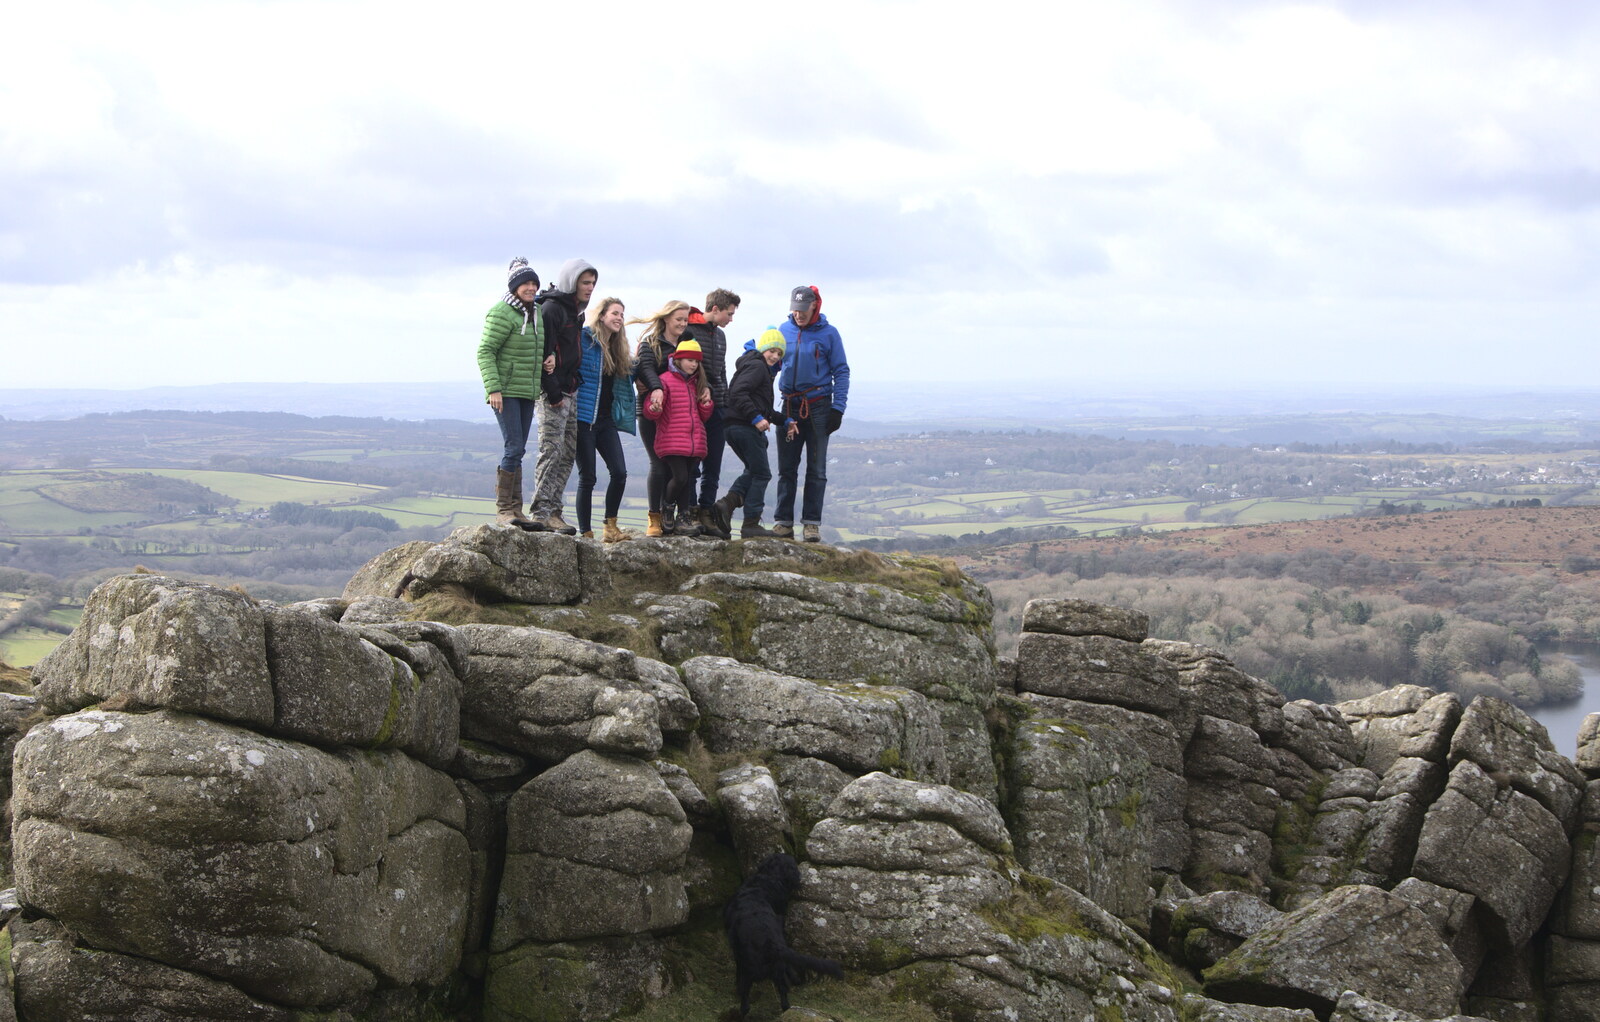 Another climbing family on a rock from A Trip to Grandma J's, Spreyton, Devon - 18th February 2015